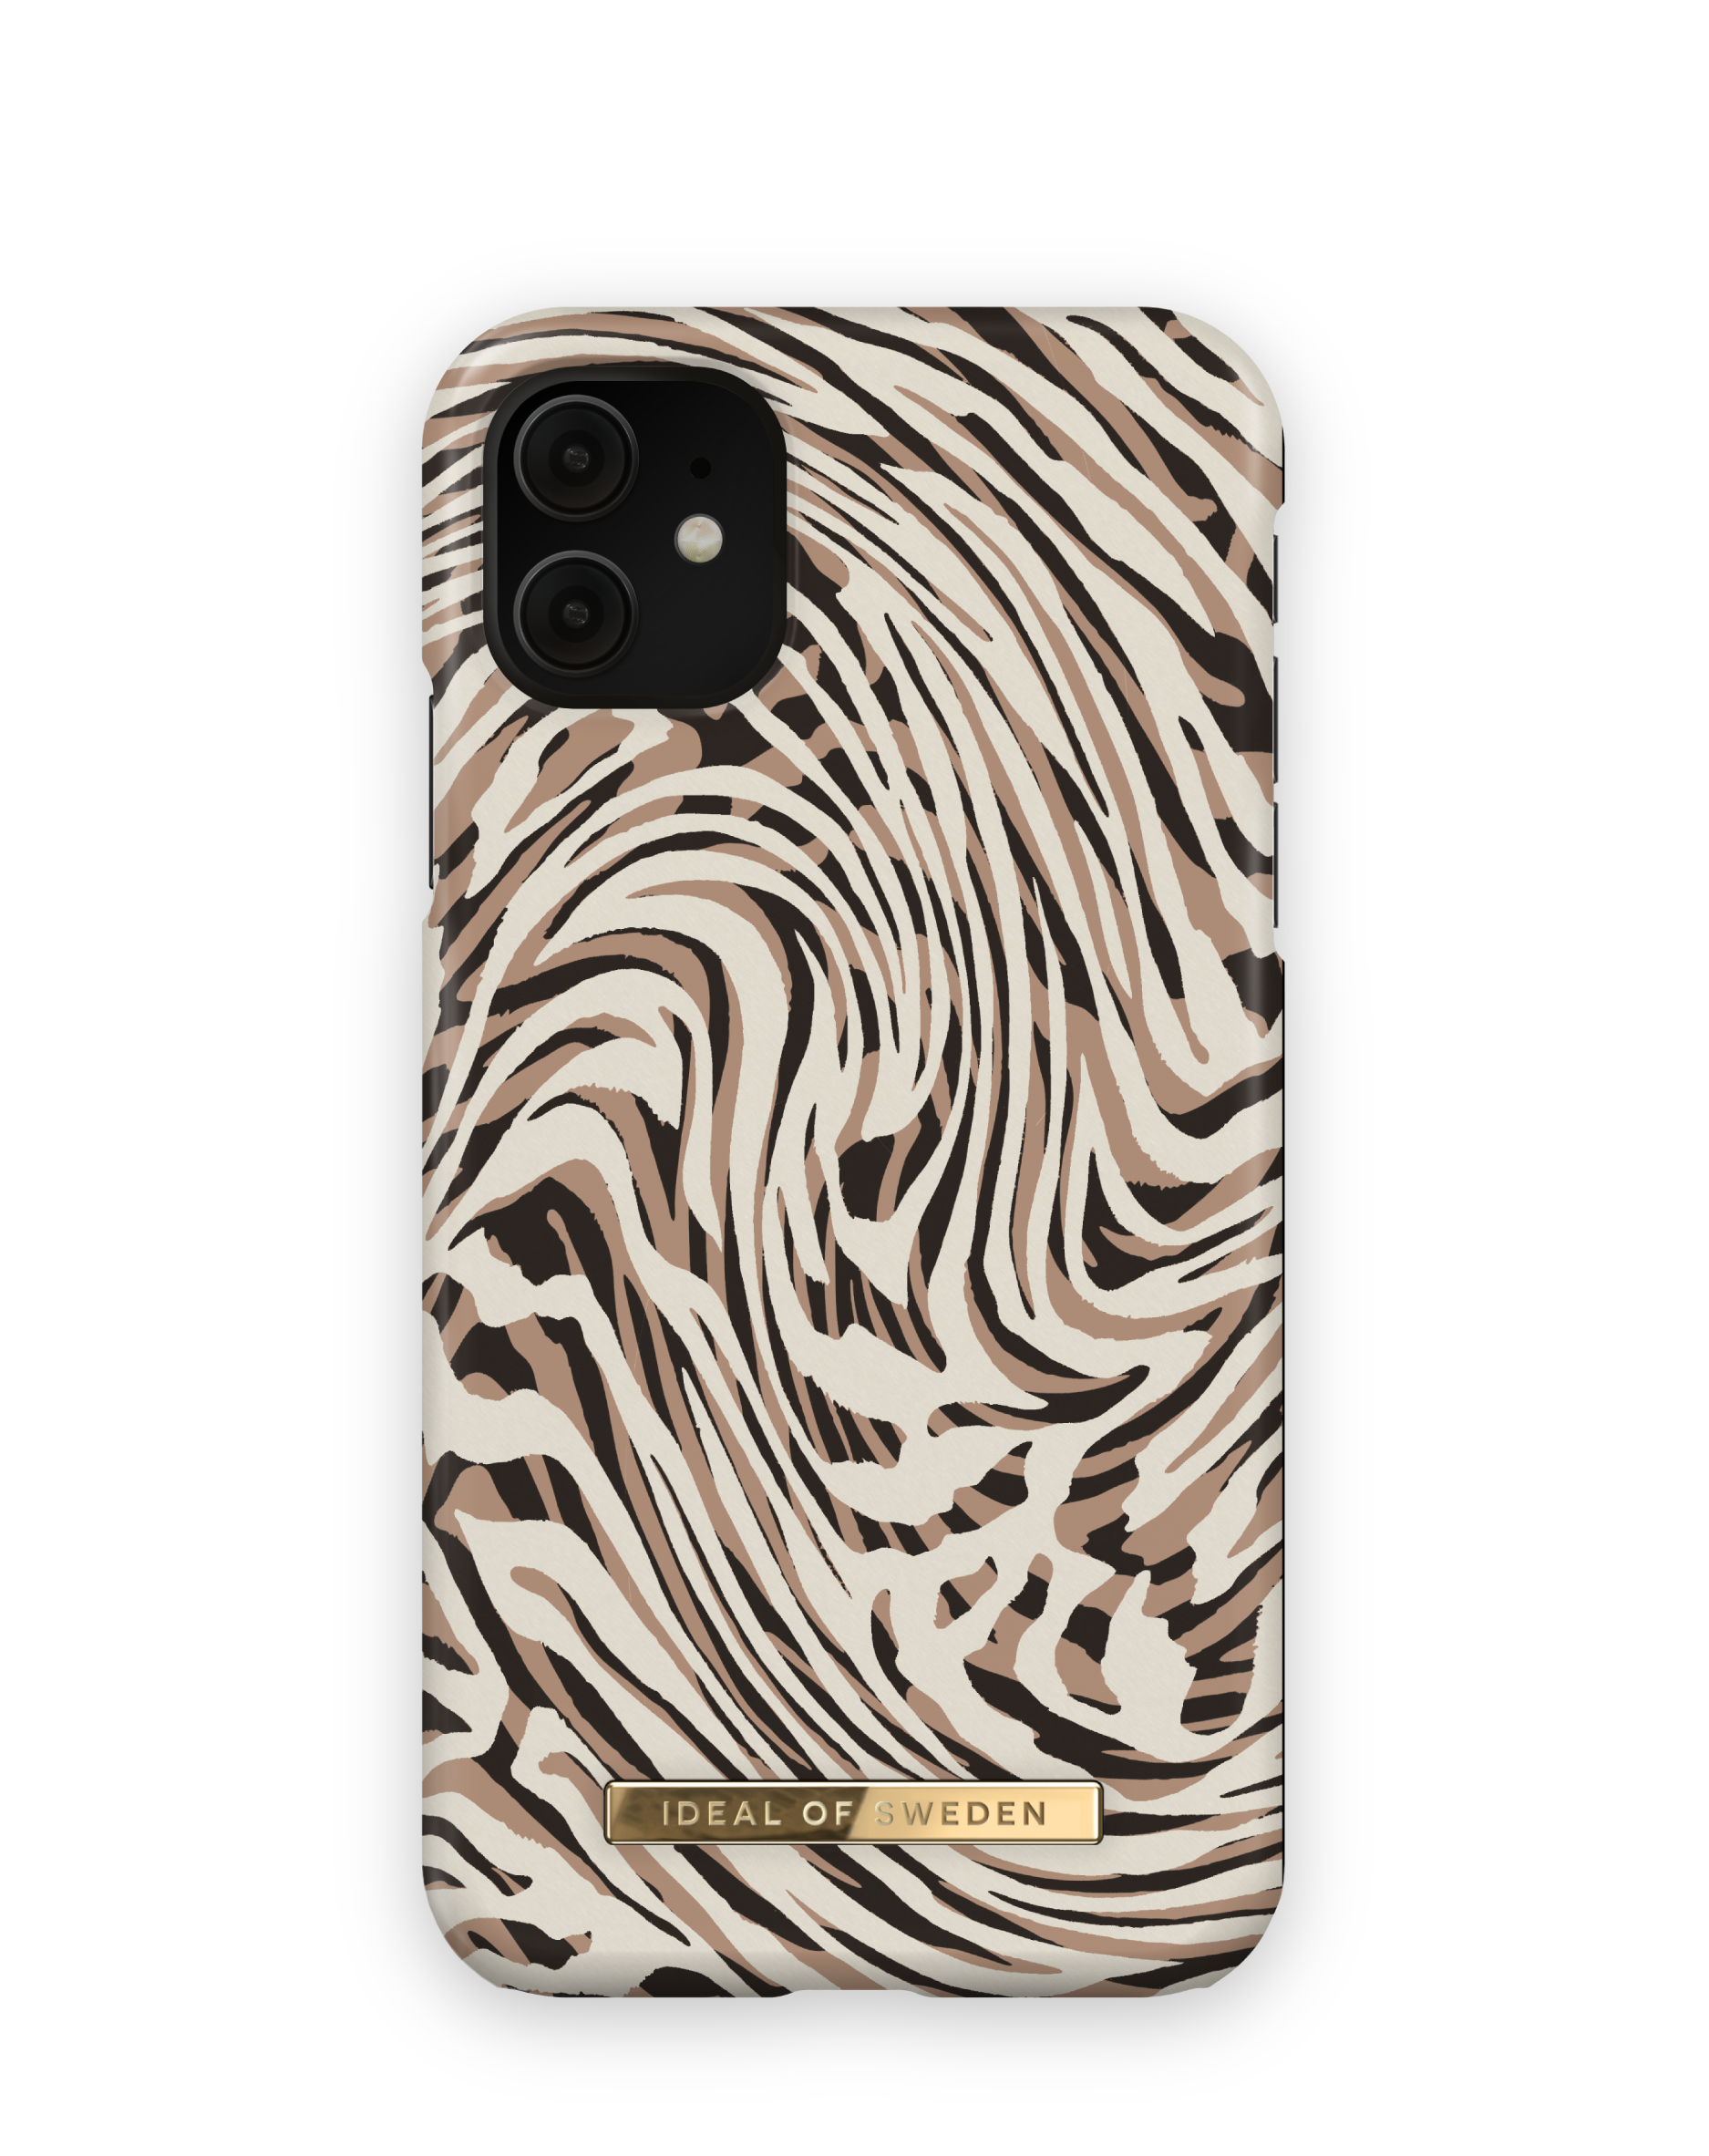 IDEAL OF SWEDEN IDFCSS22-I1961-392, XR, Zebra iPhone iPhone Apple, Backcover, / 11 Hypnotic